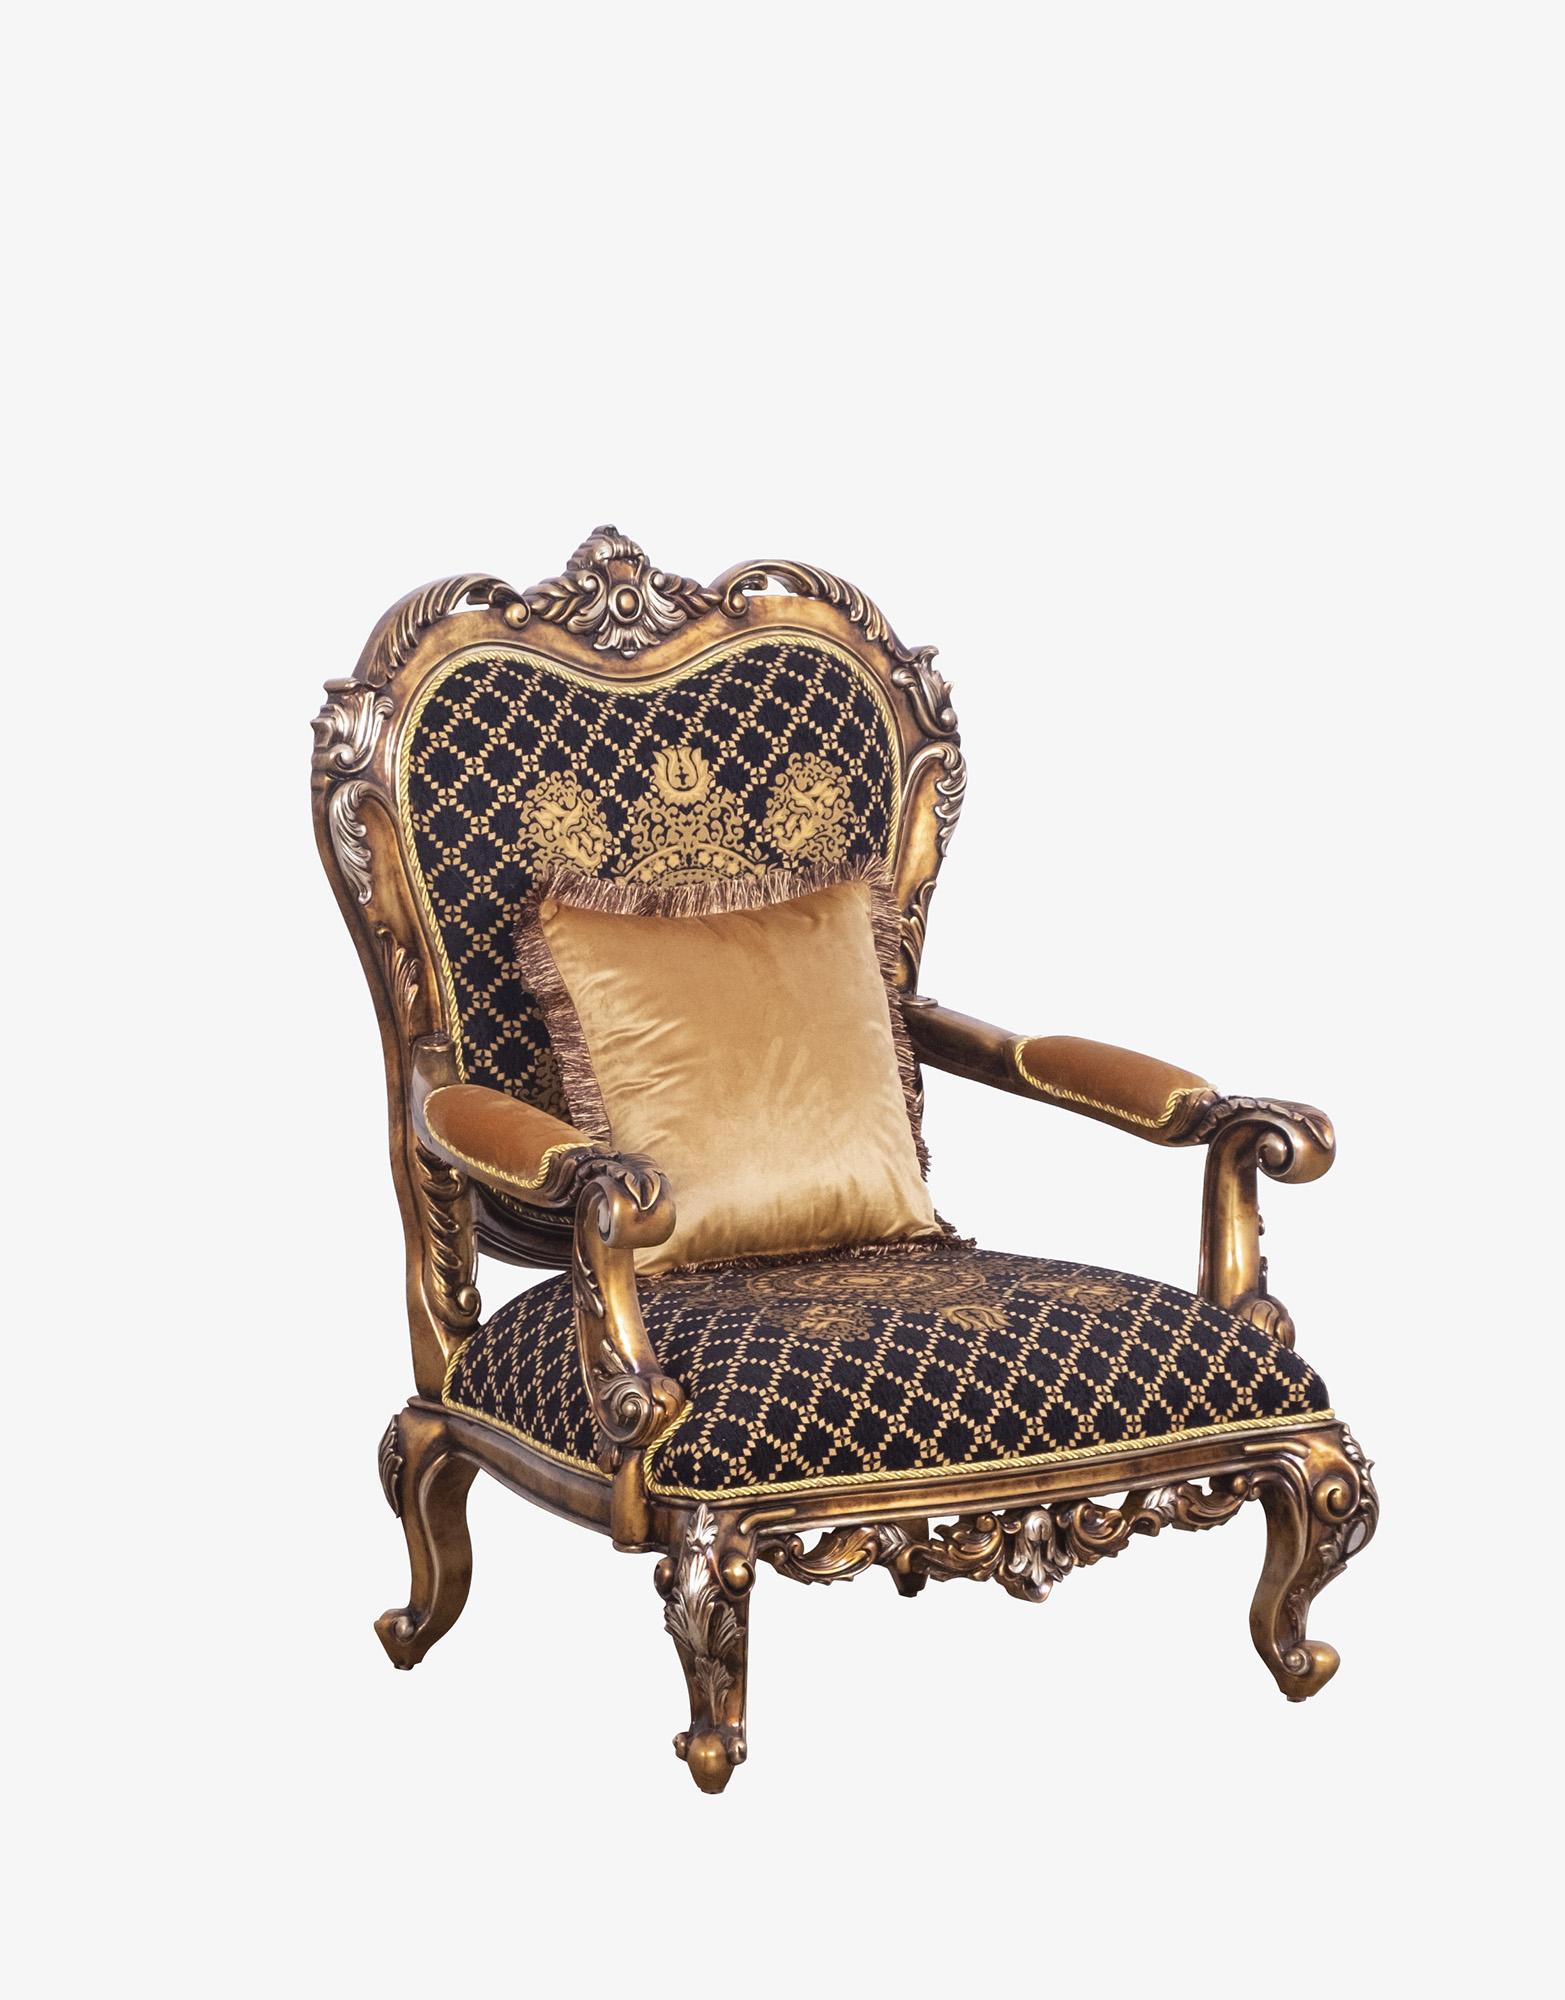 Classic, Traditional Arm Chair ROSELLA 44697-C in Gold, Bronze, Black Fabric